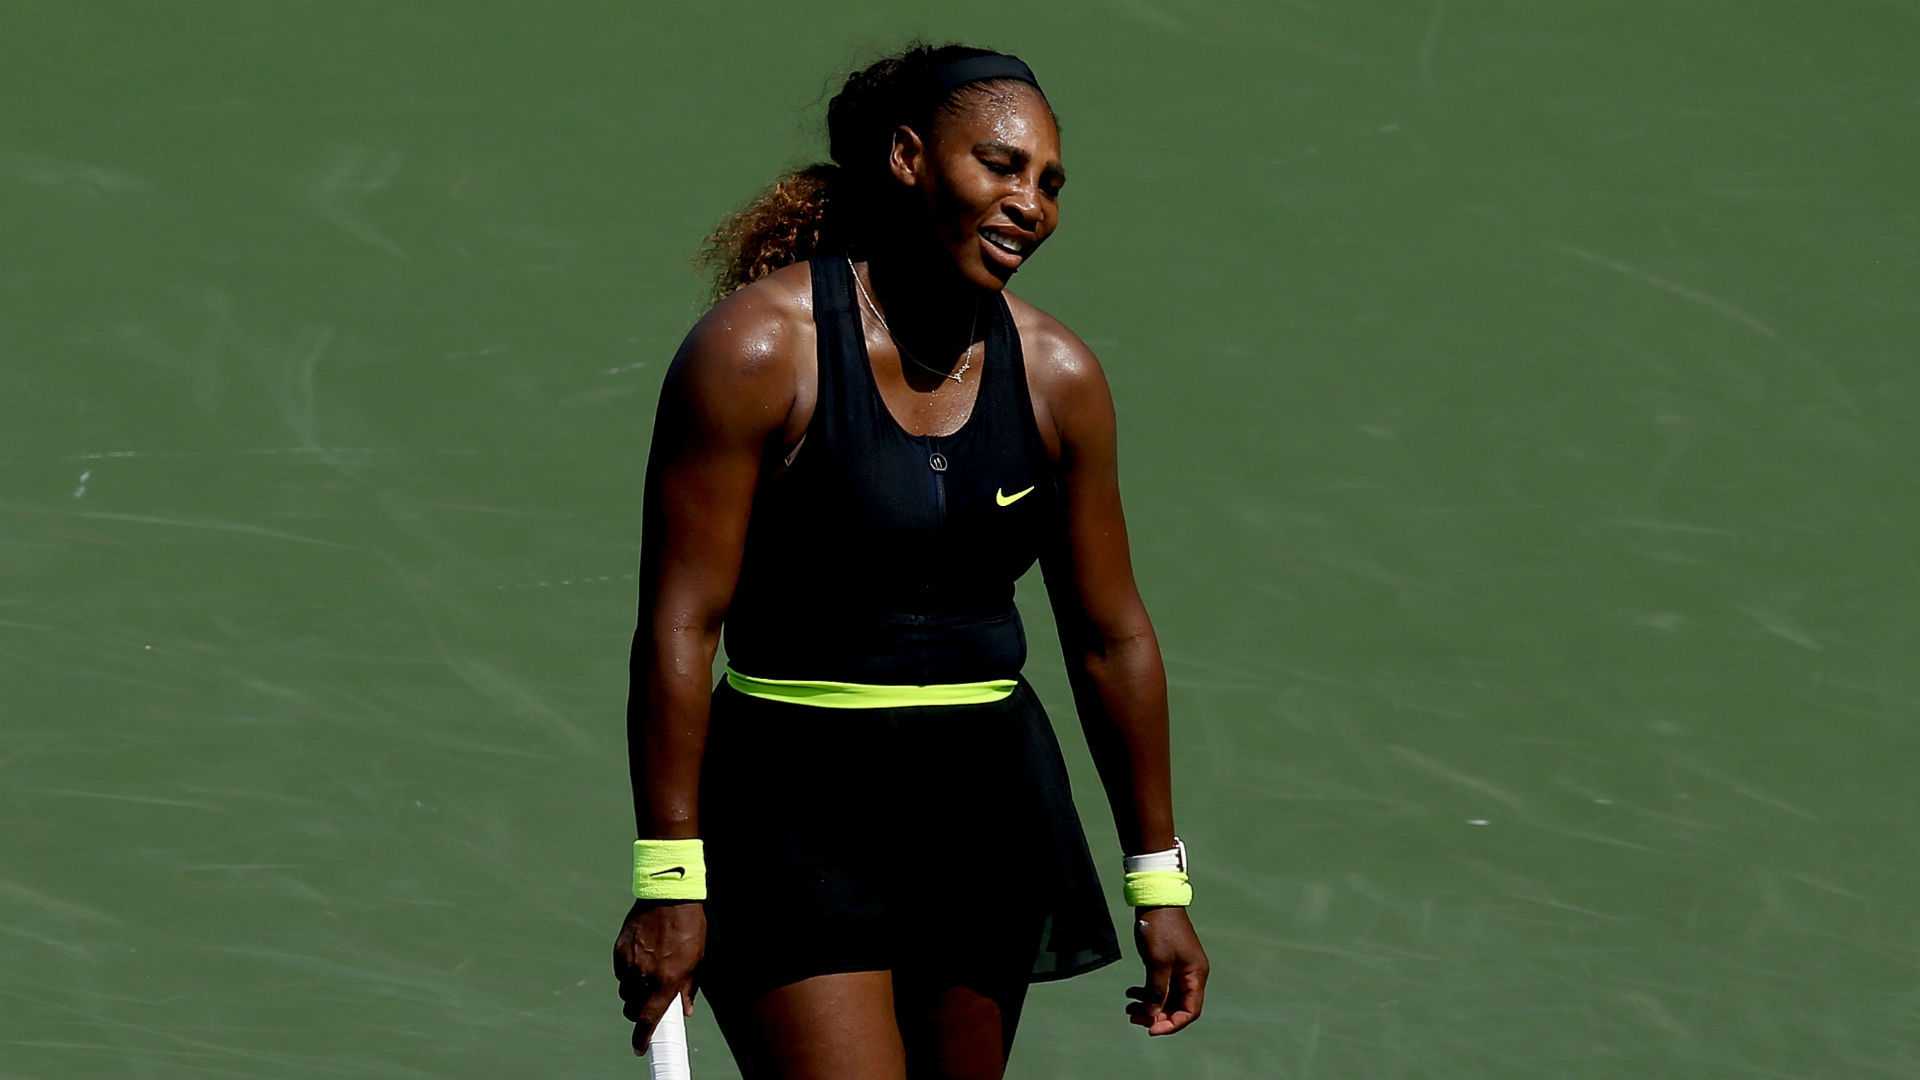 It's hard to stay positive - Serena offers no excuses for Sakkari defeat